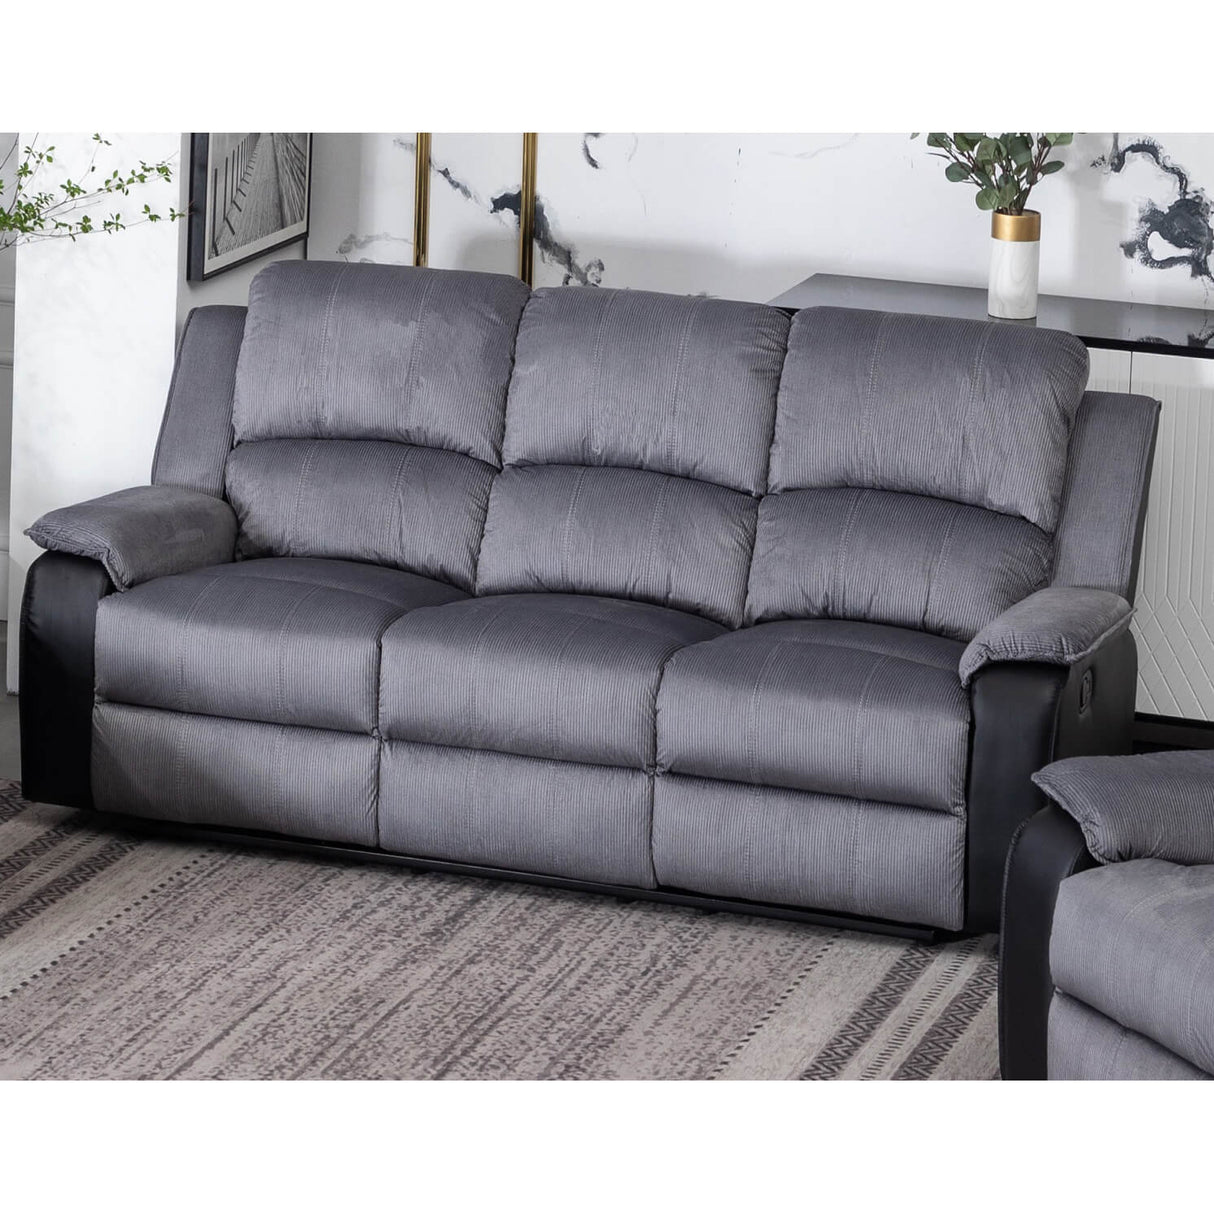 Earlsden Recliner Grey Fabric And Black PU 3 Seater